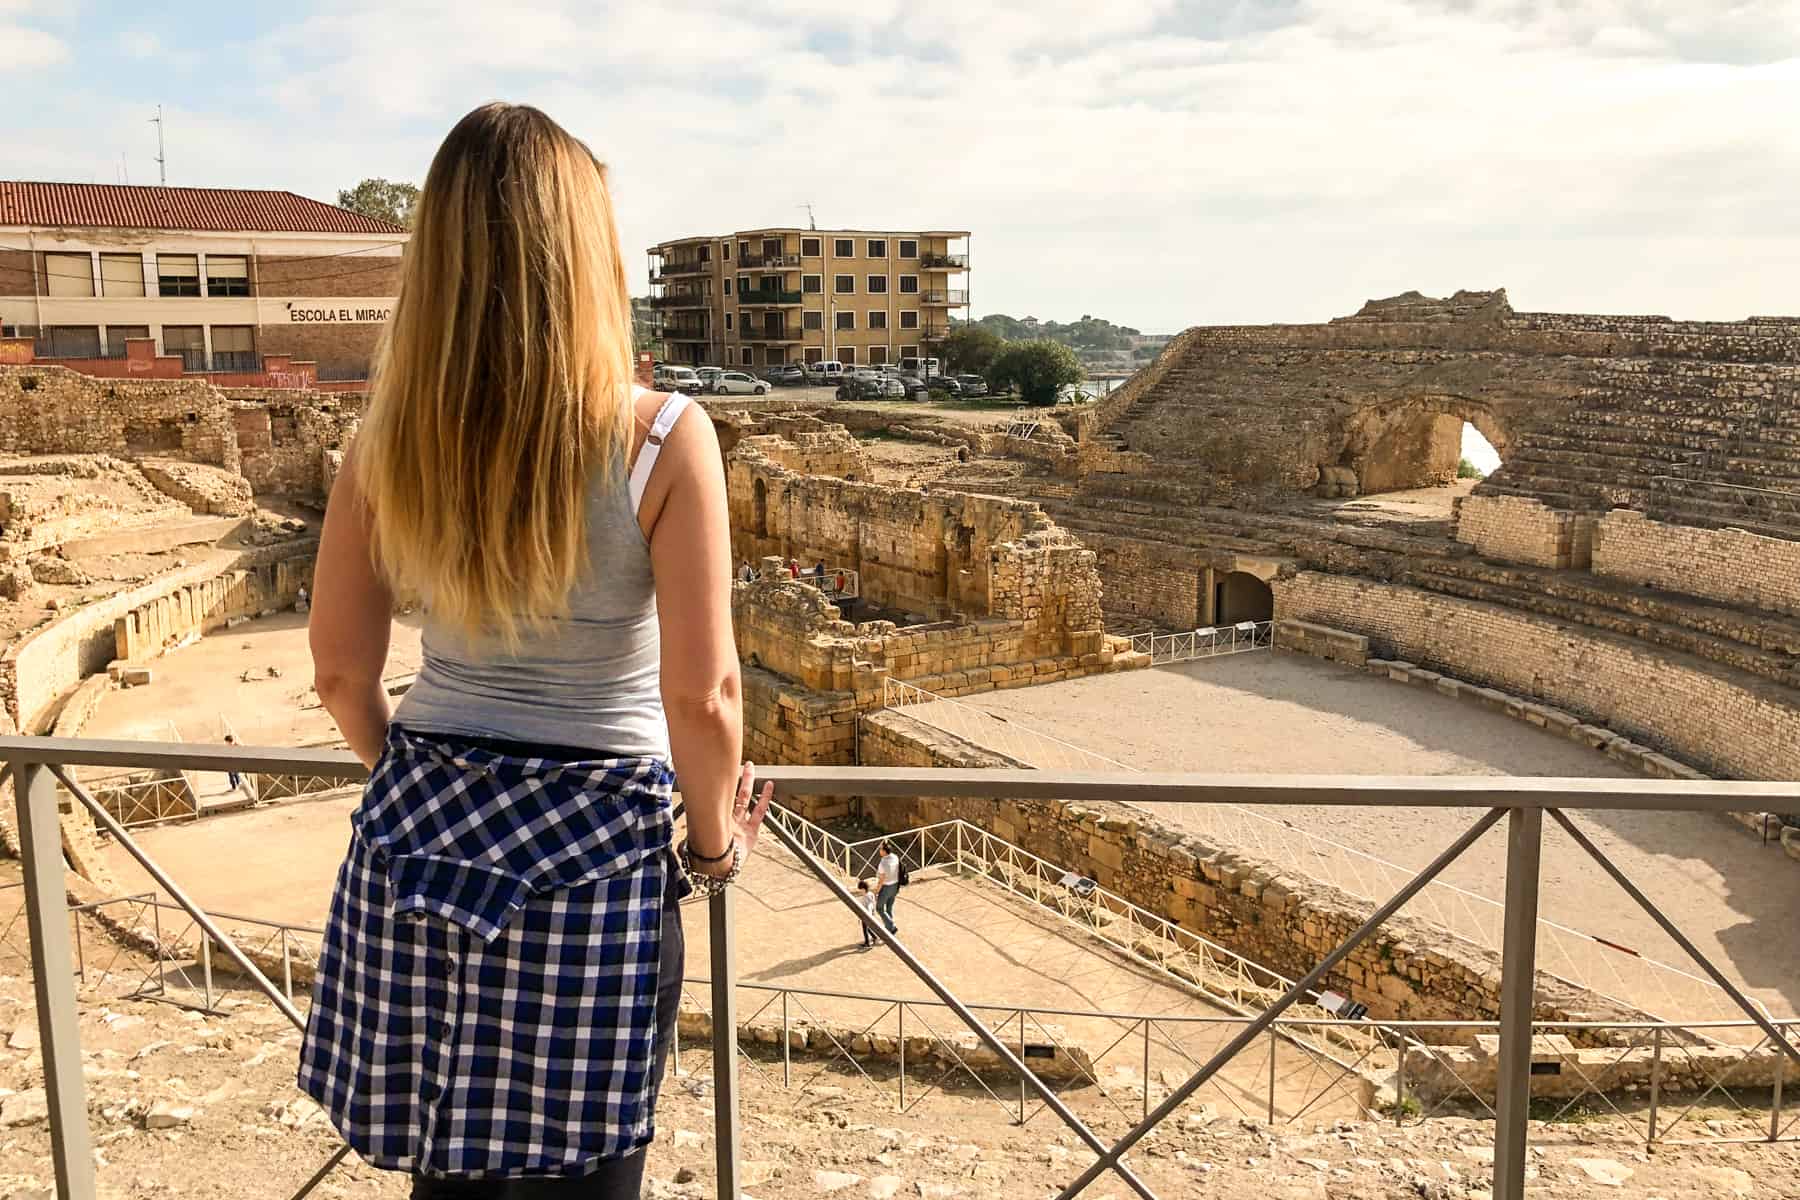 A woman with long blonde hair stands at a metal rail overlooking the romans ruins of the Tarragona Amphitheatre in Spain 